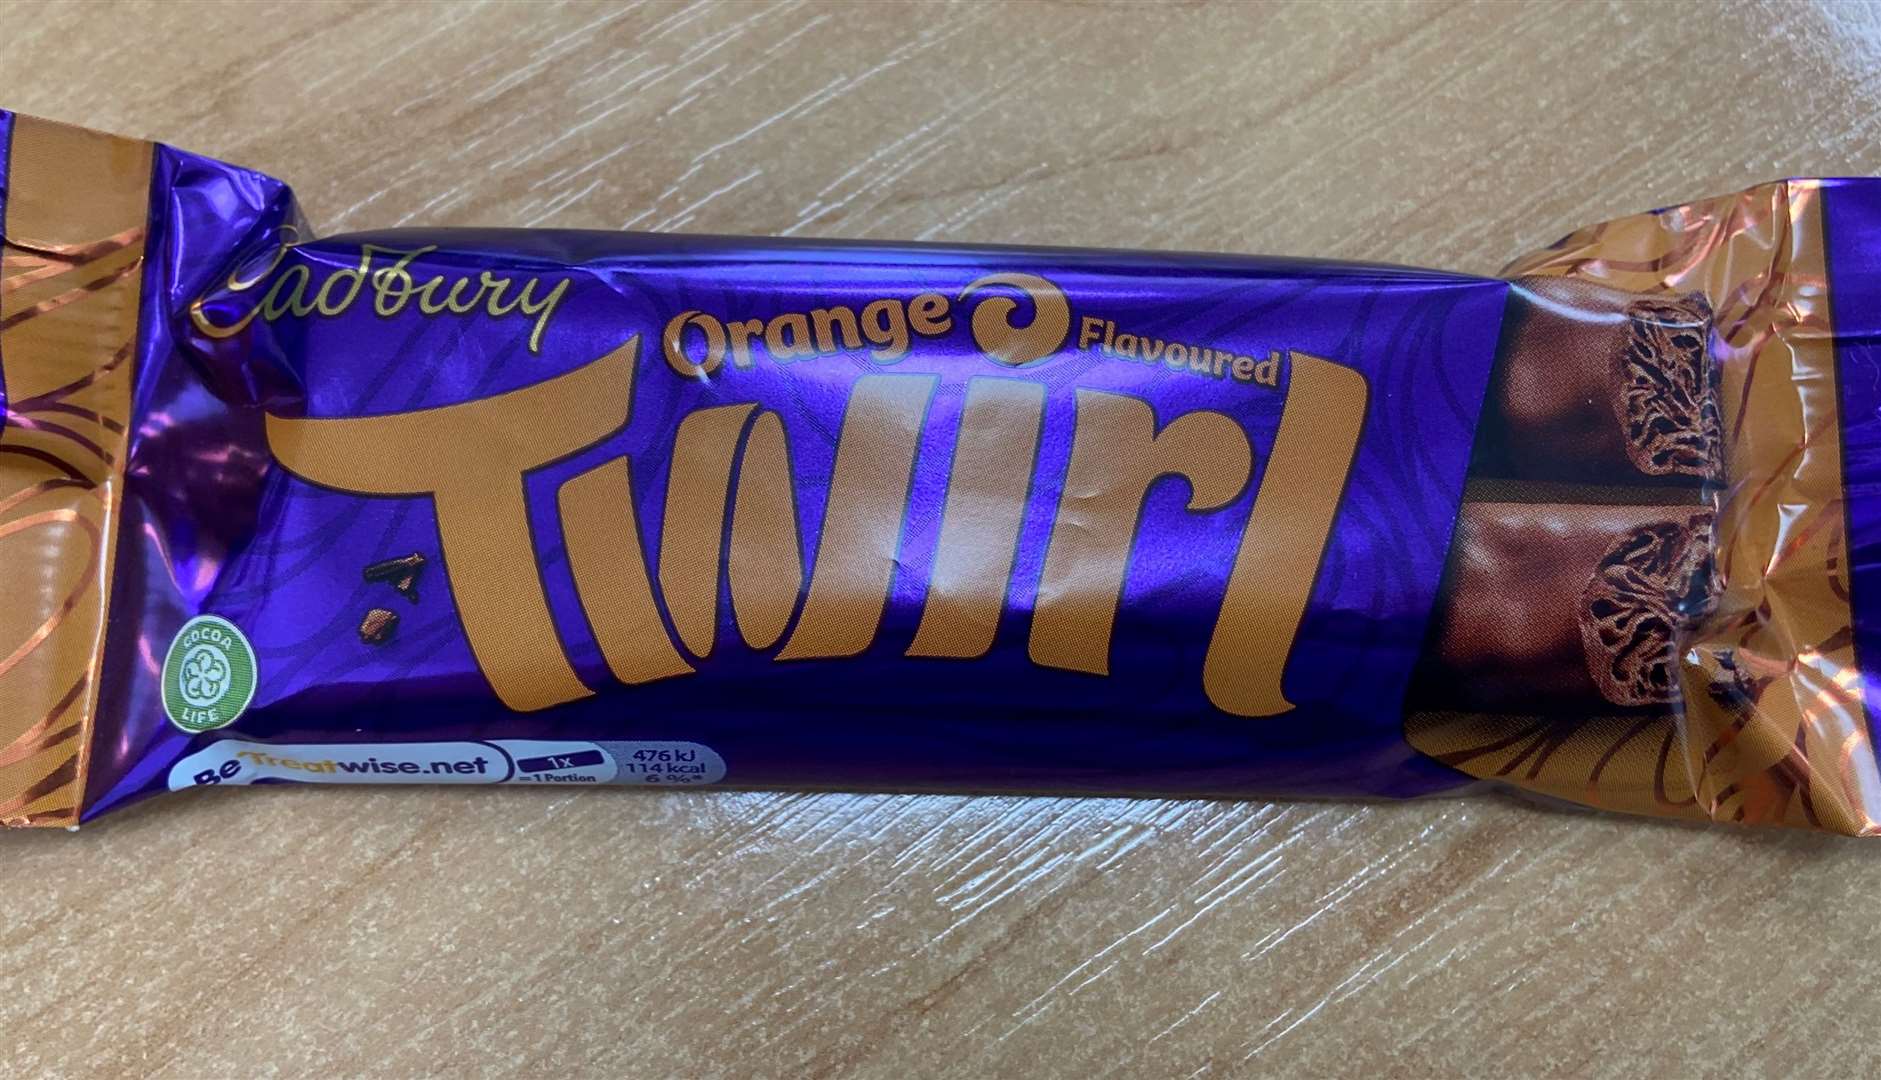 Cadbury says it will continue to sell the orange-flavoured Twirl